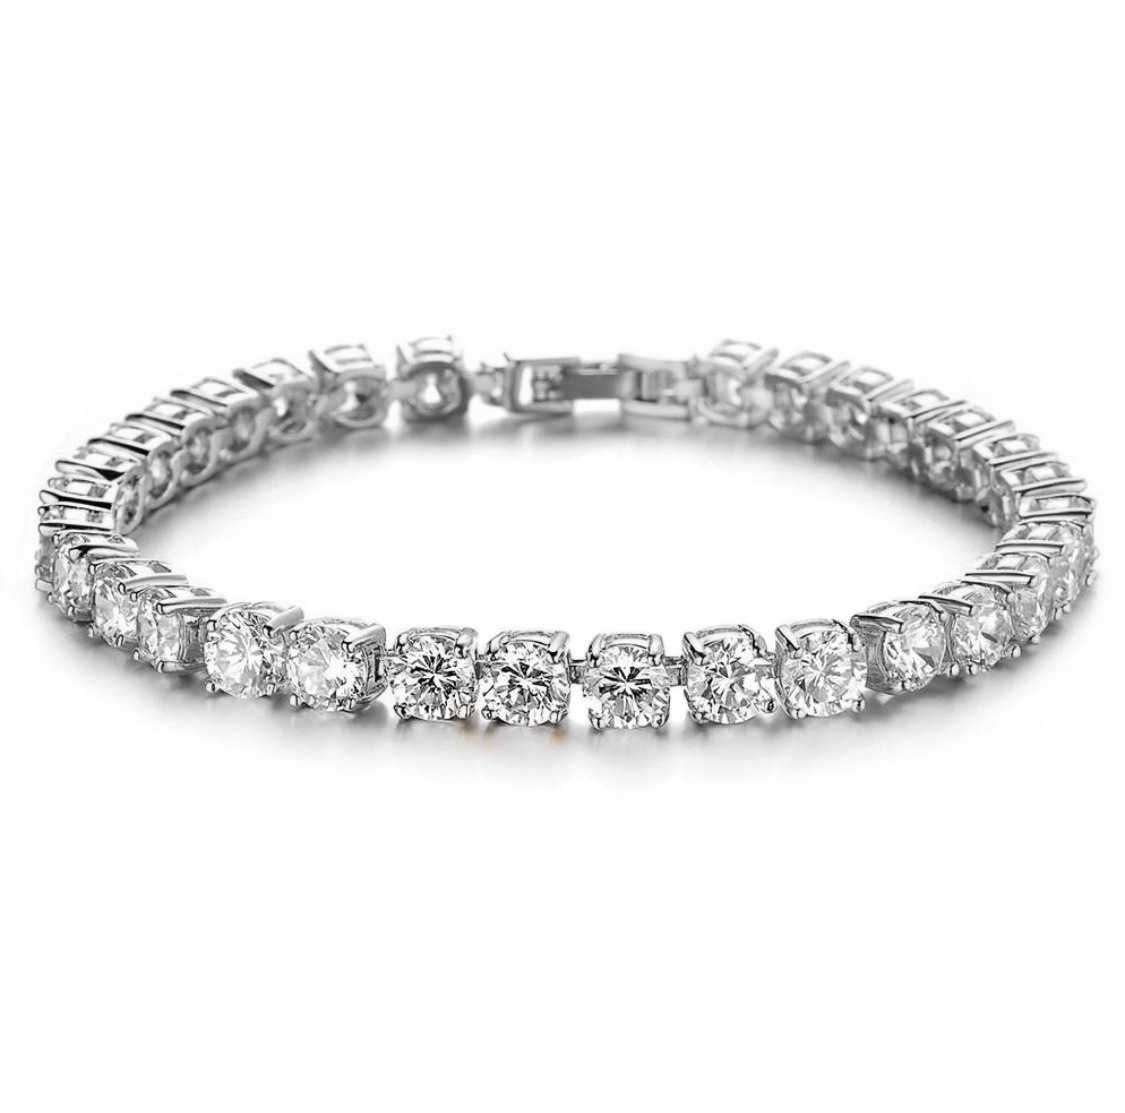 5mm-white Gold-9inches